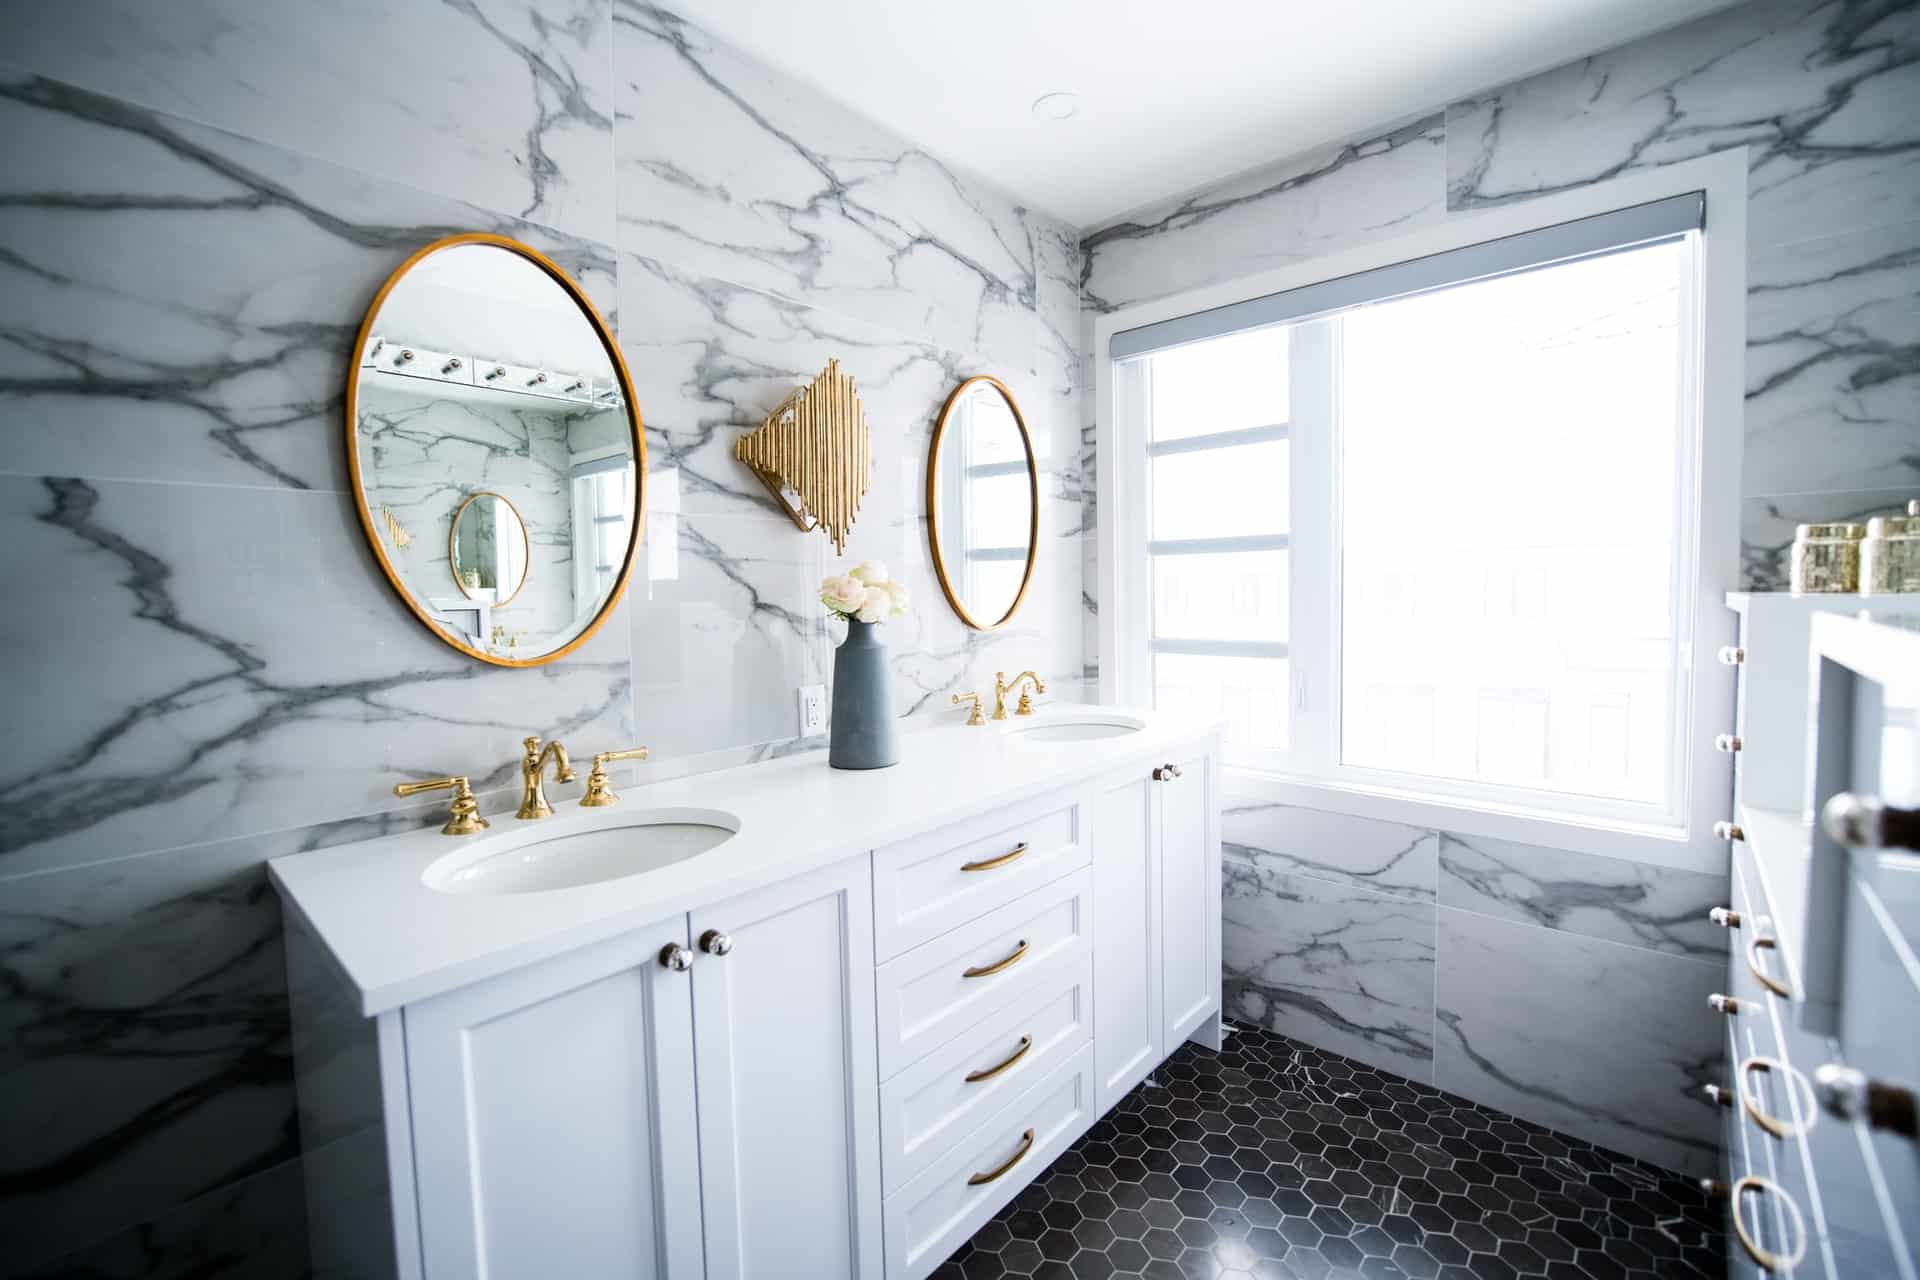 The Cost Of Bathroom Vanities A, How Much Does A Custom Vanity Top Cost